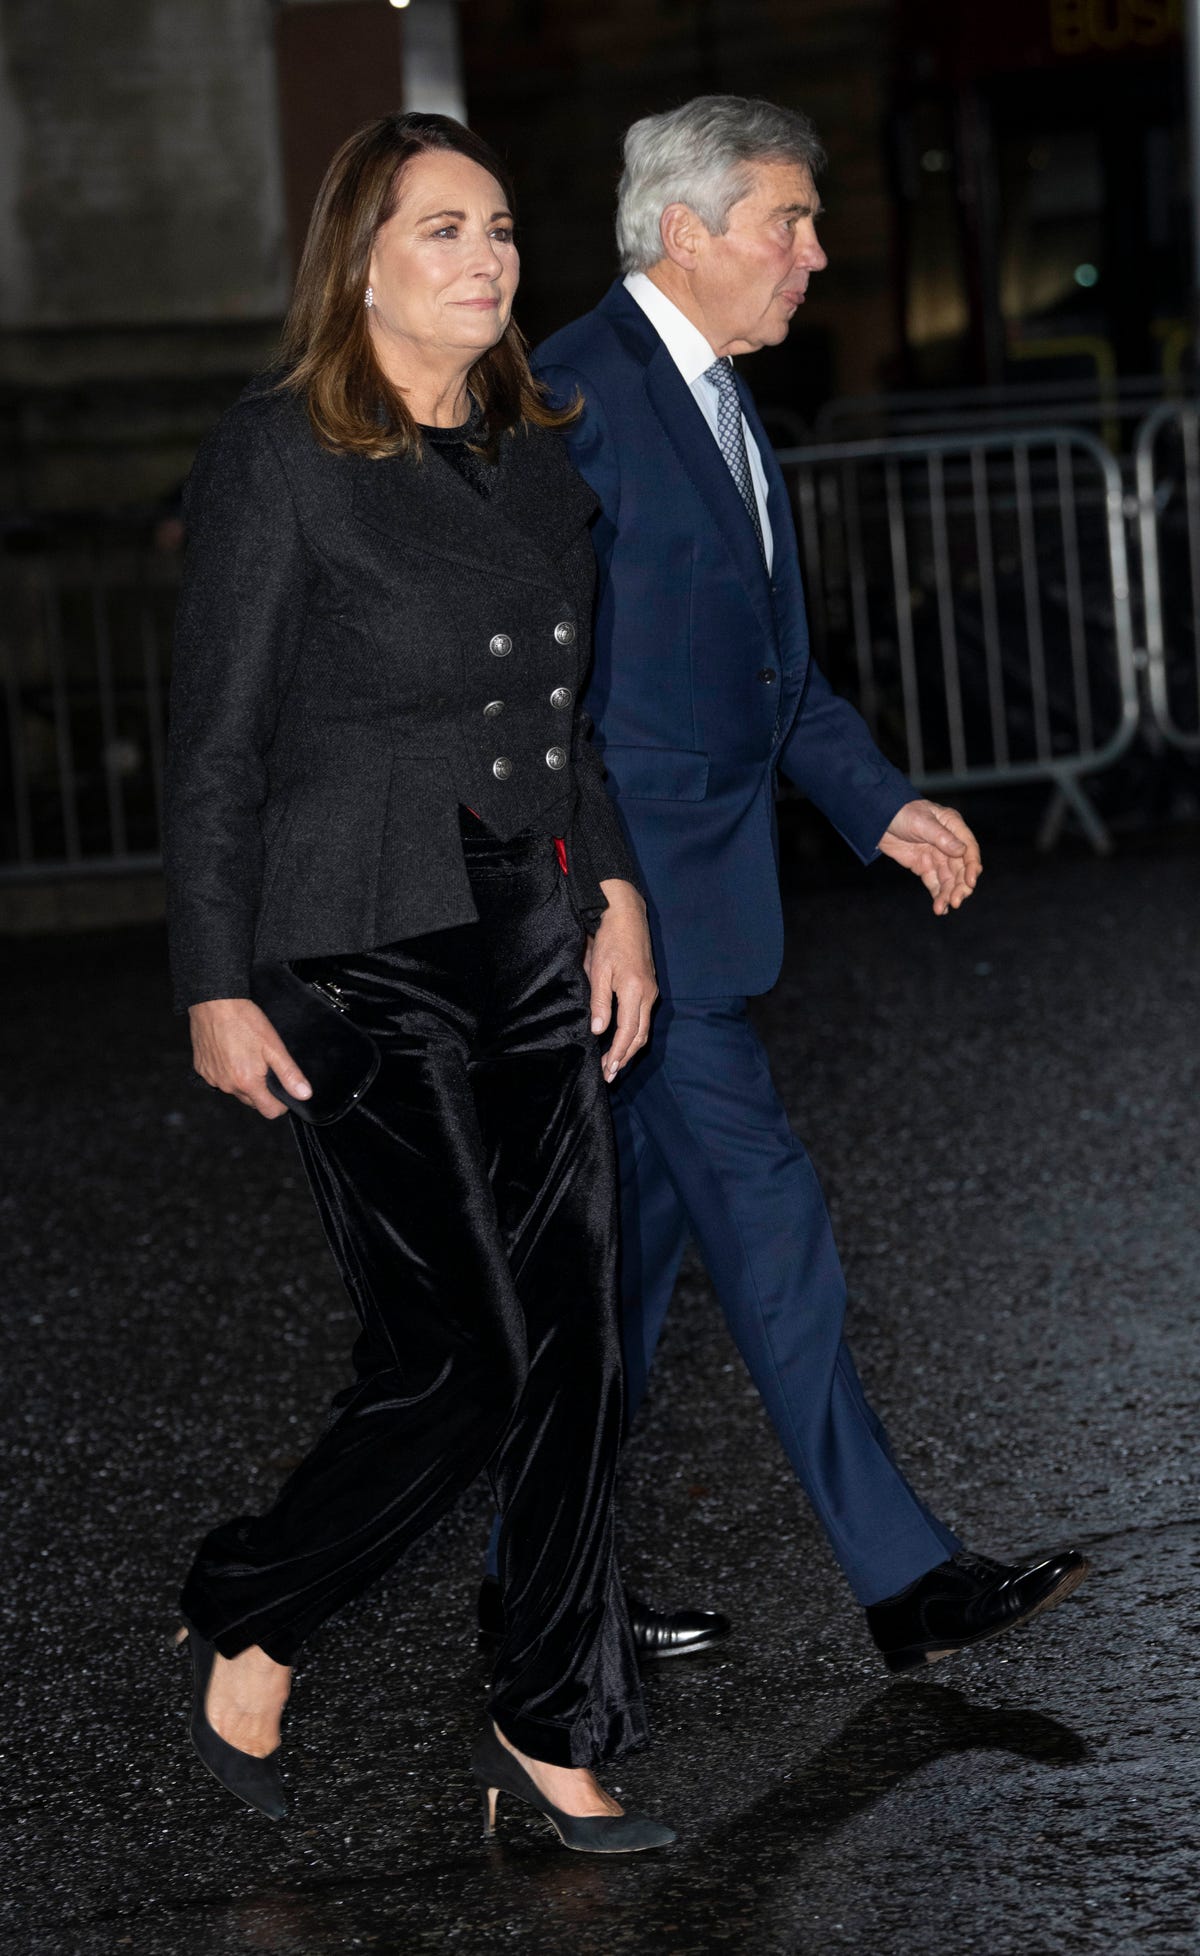 Photos: Carole and Michael Middleton Attend Kate, Princess of Wales' Christmas Service